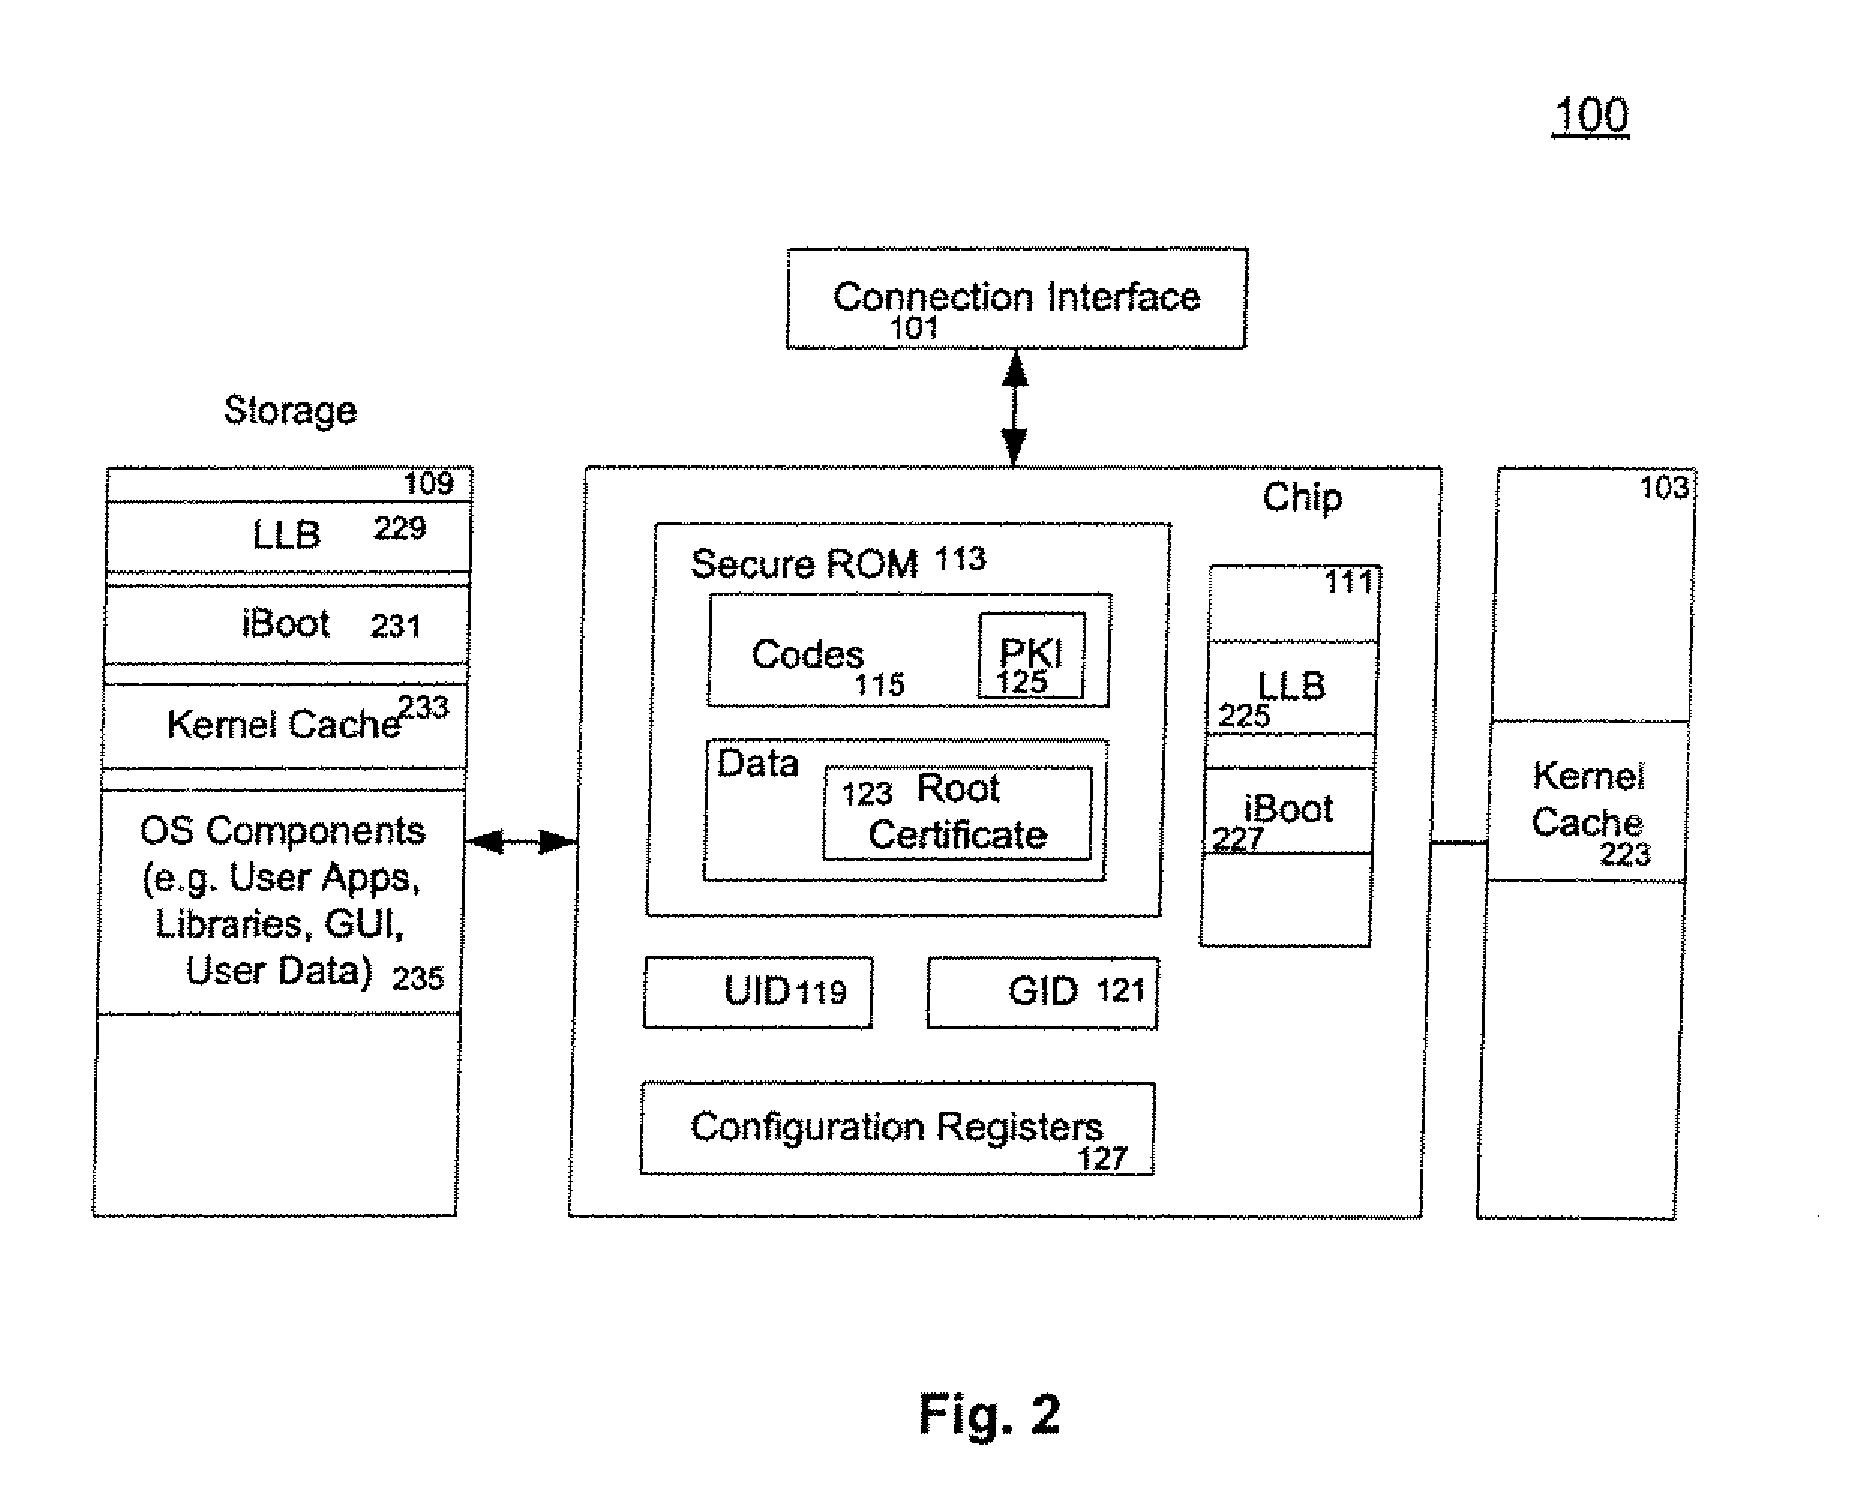 Single Security Model In Booting A Computing Device